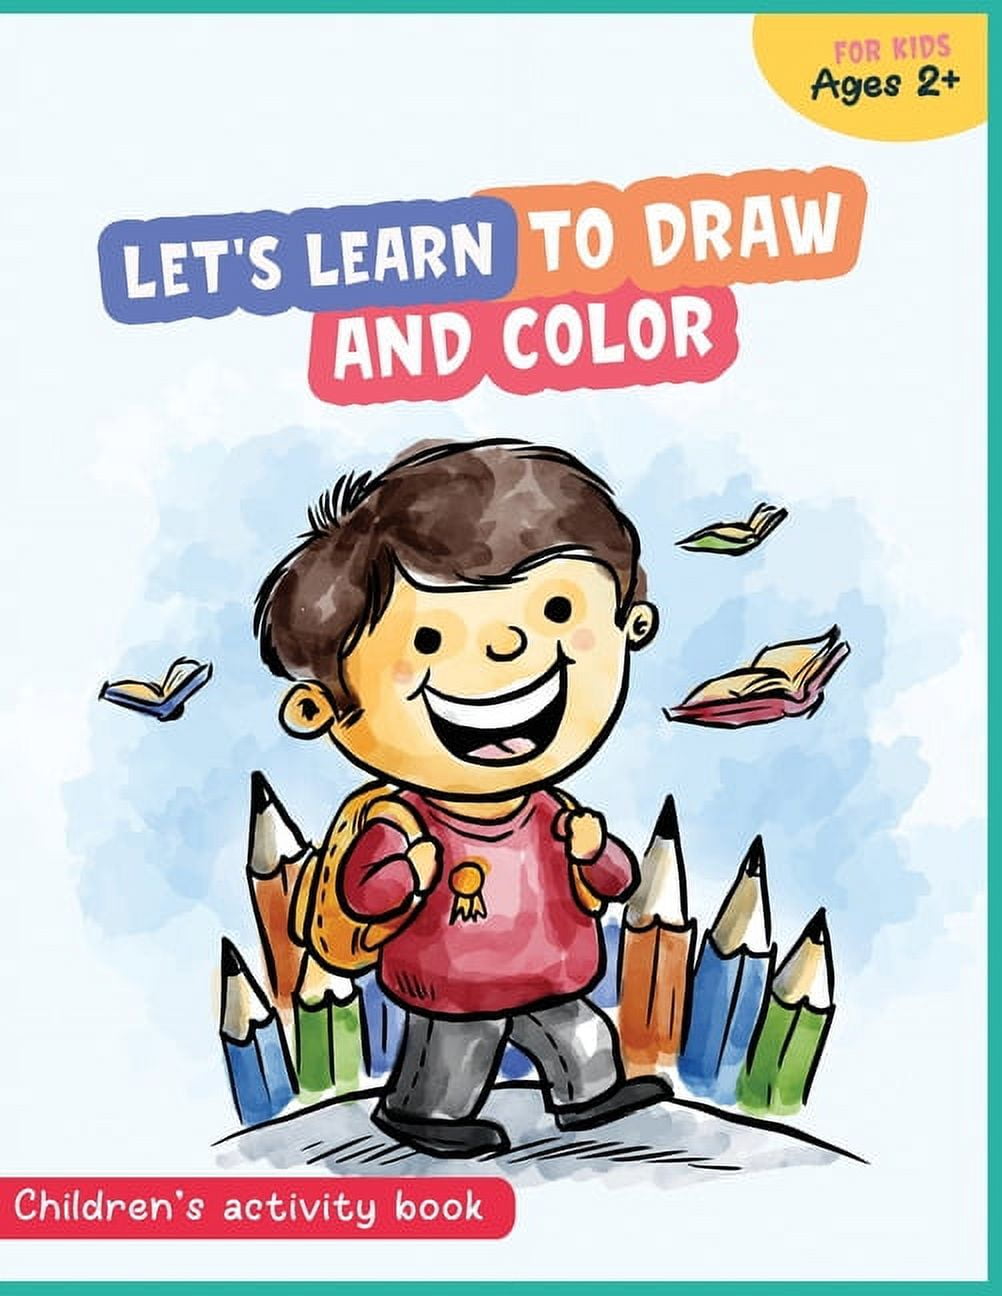 DWAR COLOR YOUR DRAWING: Notebook For kids (age 3-6 years old), Drawing,  coloring, Painting, Sketching.100 pages, 21.59 x 27.94 cm (8.5 x 11 in).